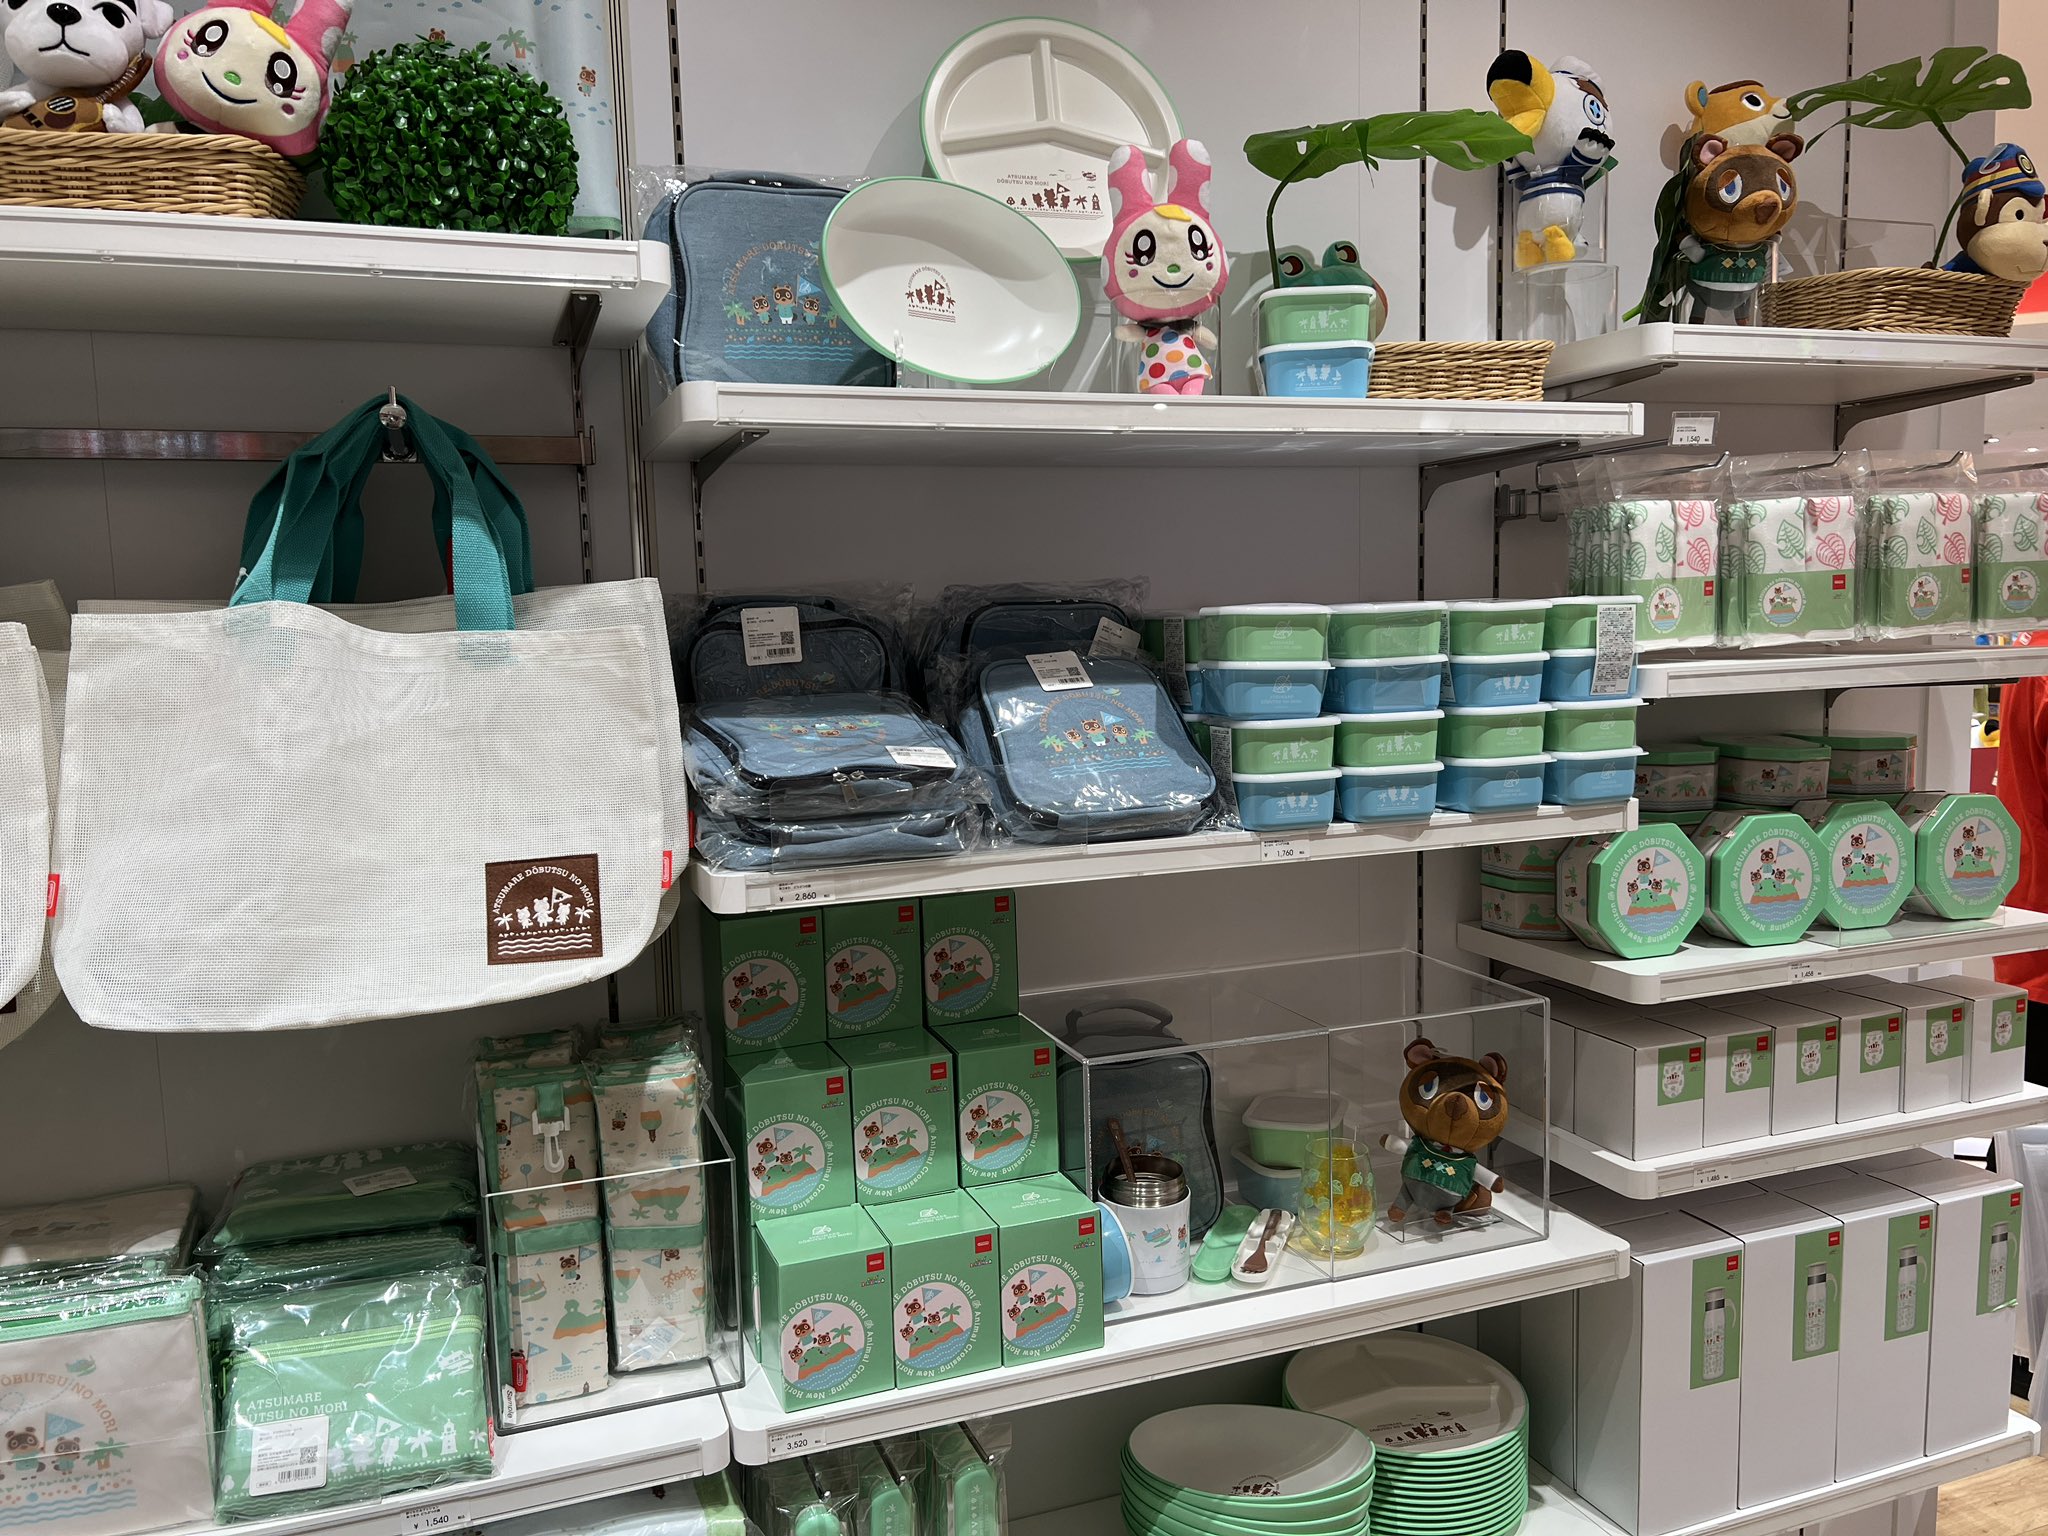 diskret boksning skuffe Animal Crossing World 🐦☕ on Twitter: "Take a peek at the treasure trove of Animal  Crossing merch available at Nintendo Tokyo in Japan! 🇯🇵  https://t.co/2VvmHinJ1n" / Twitter